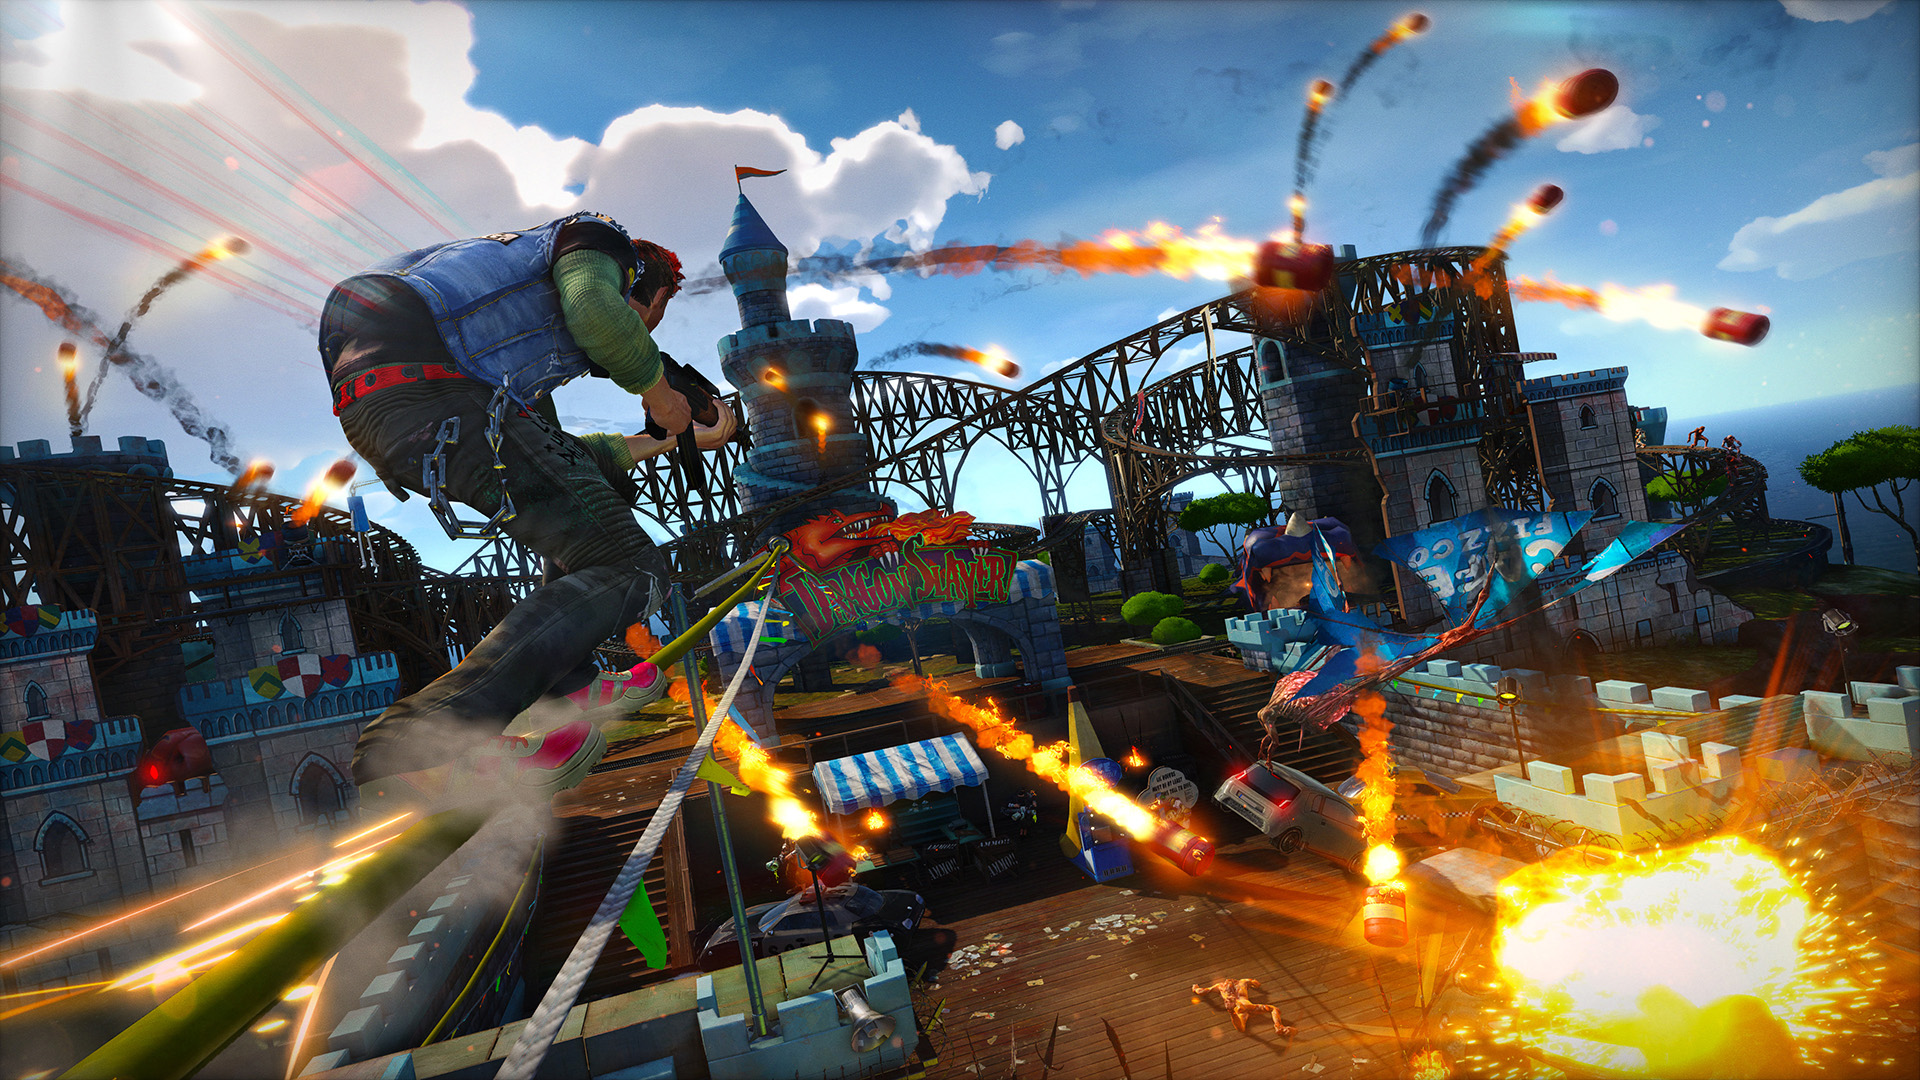 Upcoming PS5 Games List Leaks, Sony Registers Sunset Overdrive